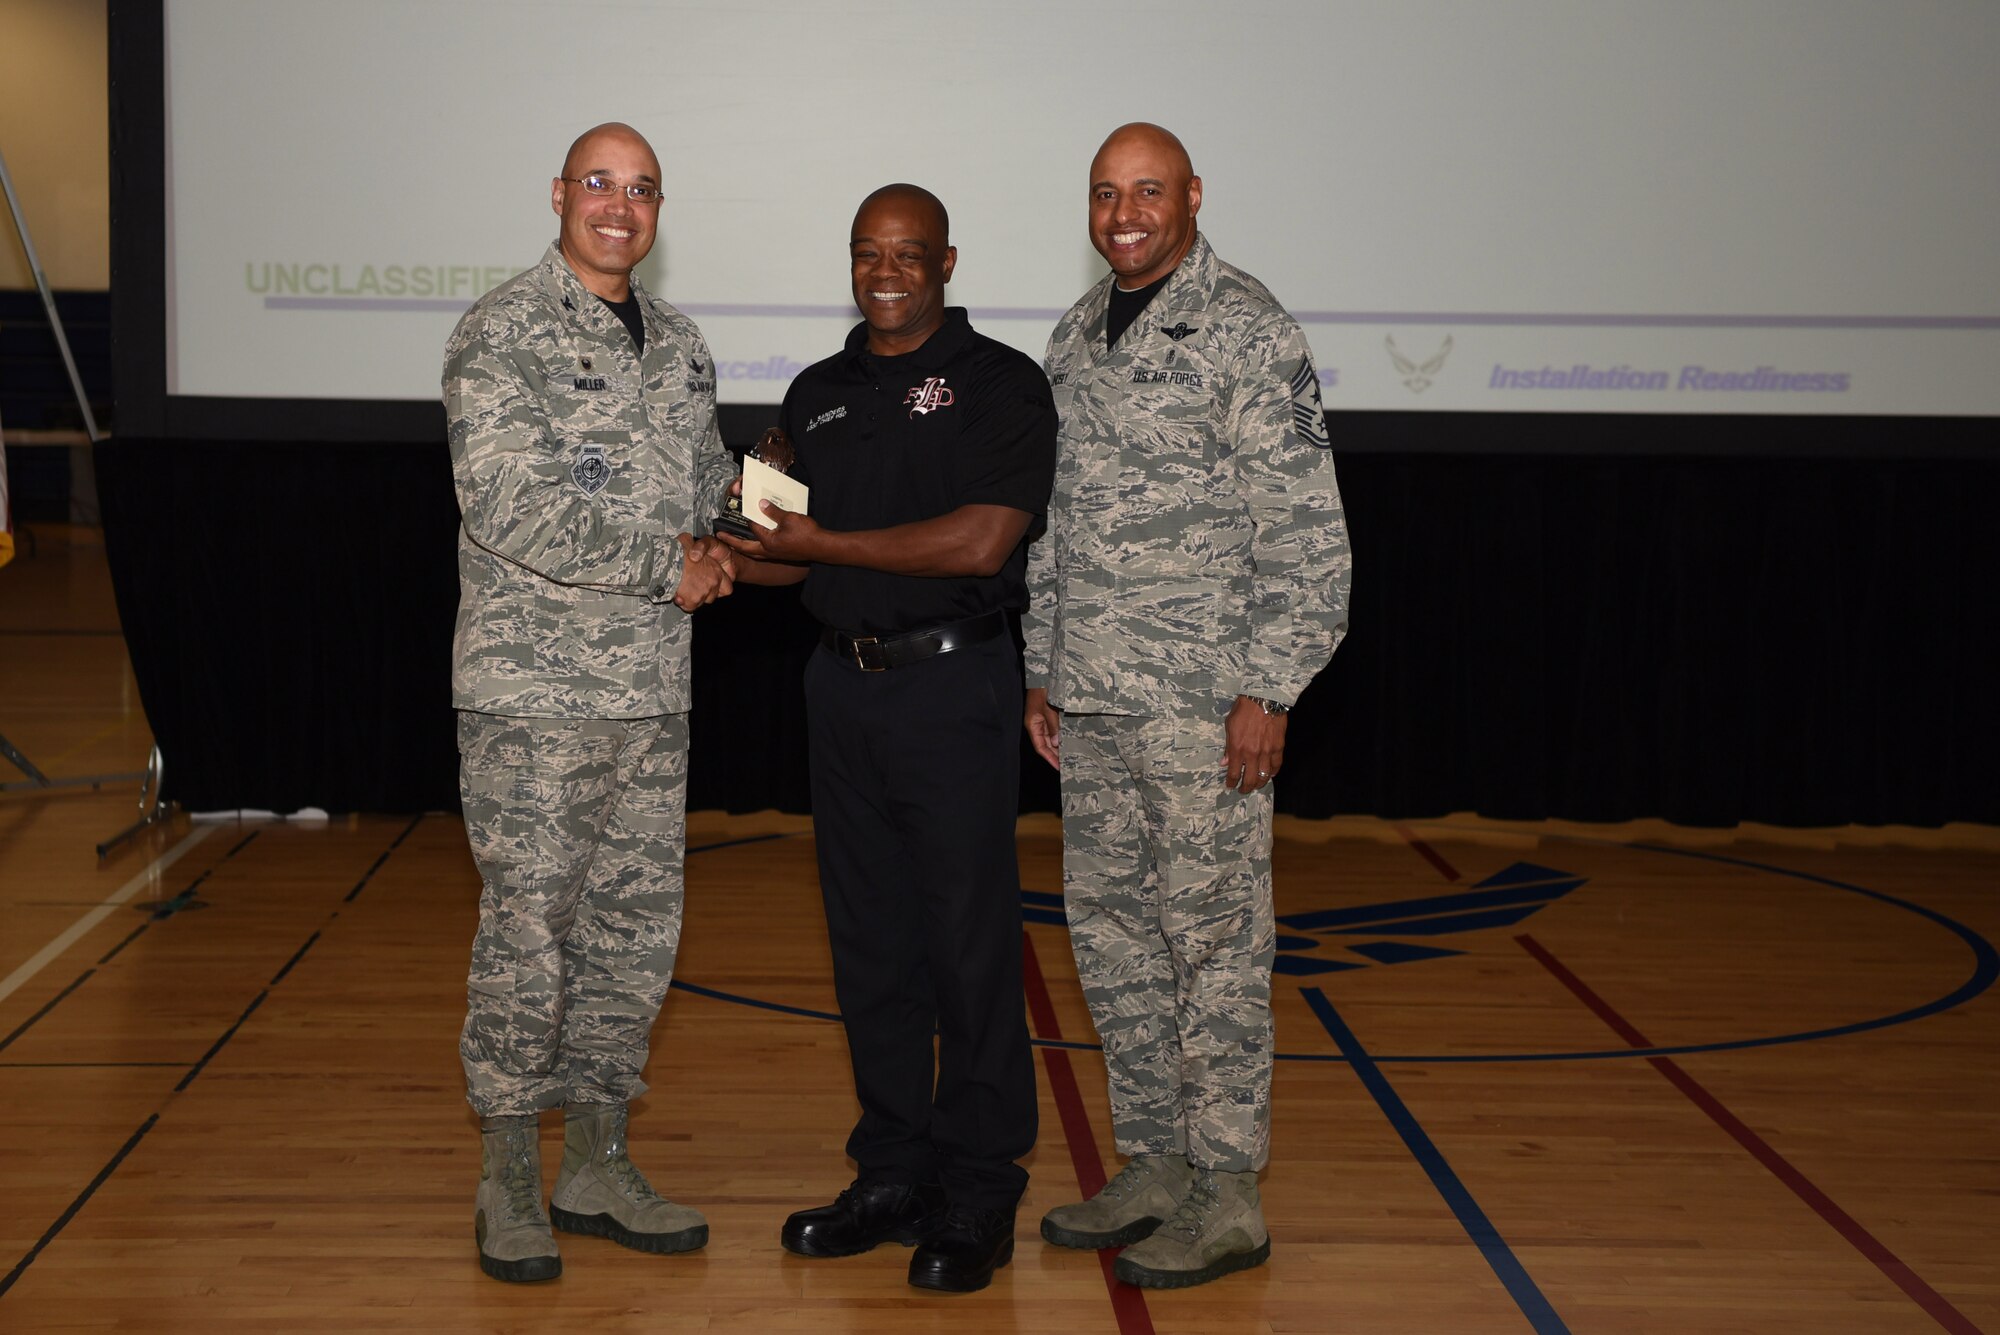 Andre Sanders, 460th Civil Engineer Squadron assistant chief of health and safety, receives the Category II Non-Supervisory Civilian of the Quarter Award May 19, 2017, on Buckley Air Force Base, Colo.  Awards were given to the Team Buckley members who showed dedication, hard work and exceeded their supervisor’s expectations. (U.S. Air Force photo by Airman 1st Class Holden S. Faul/ Released)